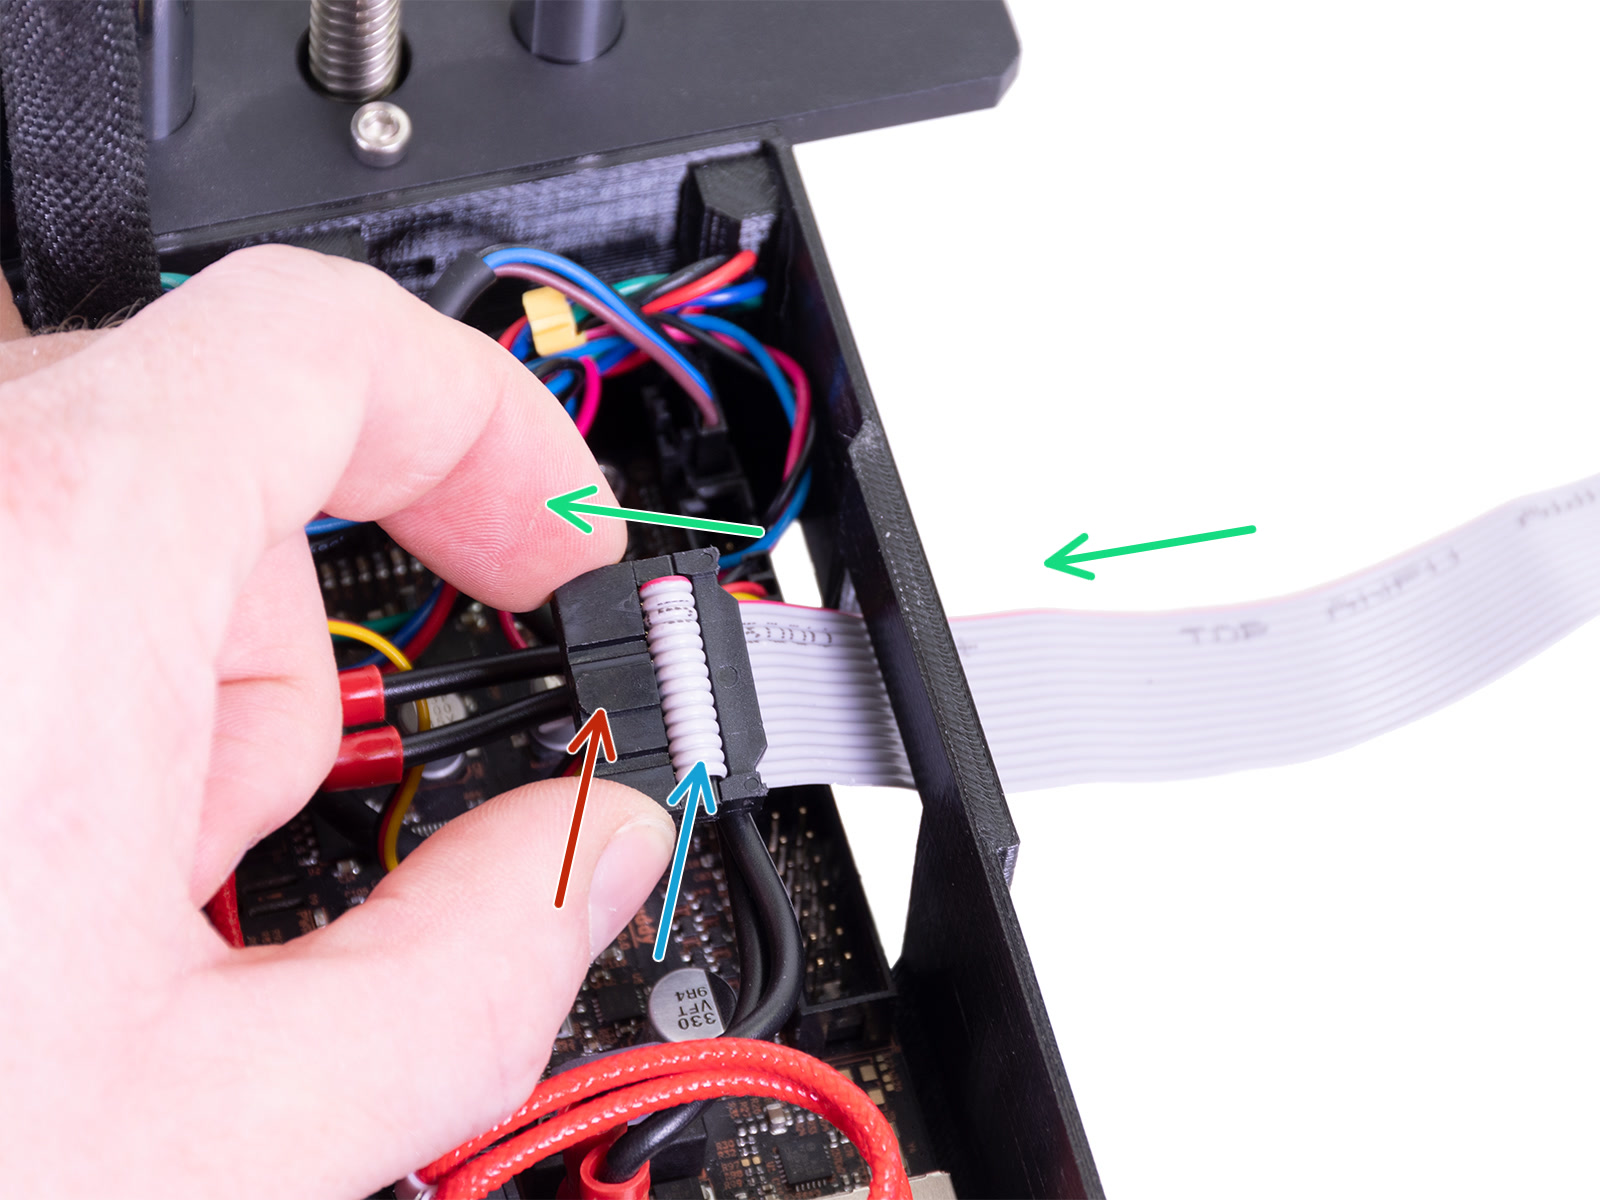 Connecting the LCD cable